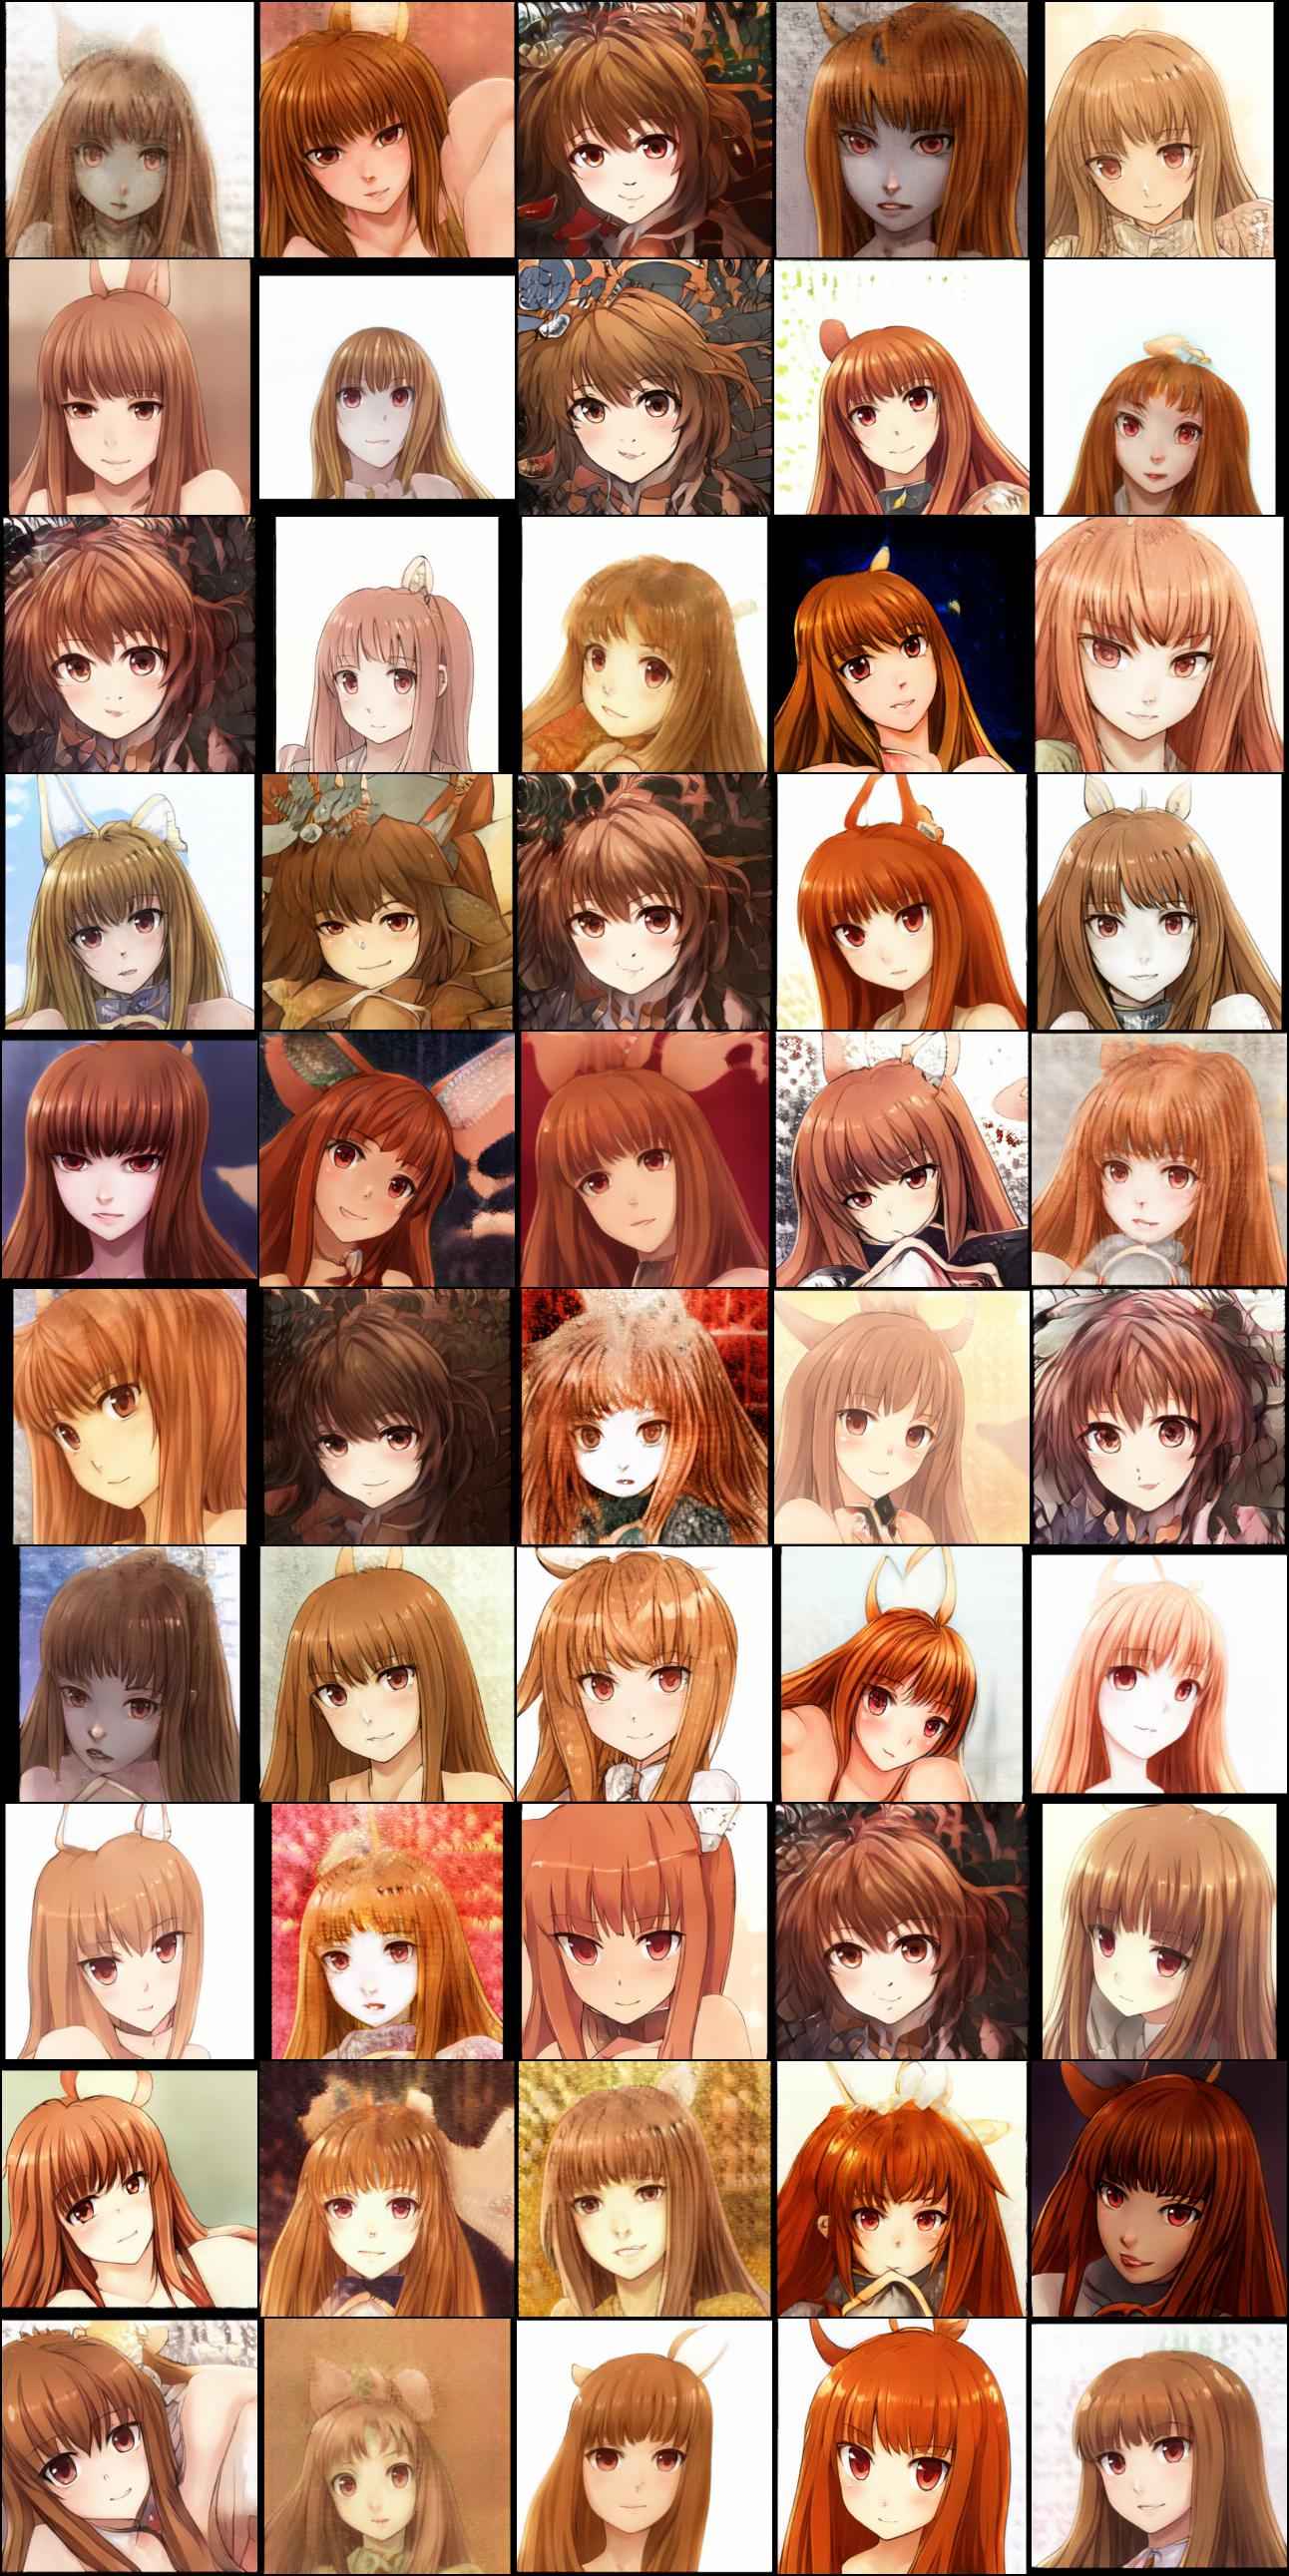 Holo (Spice and Wolf), class #273 random samples